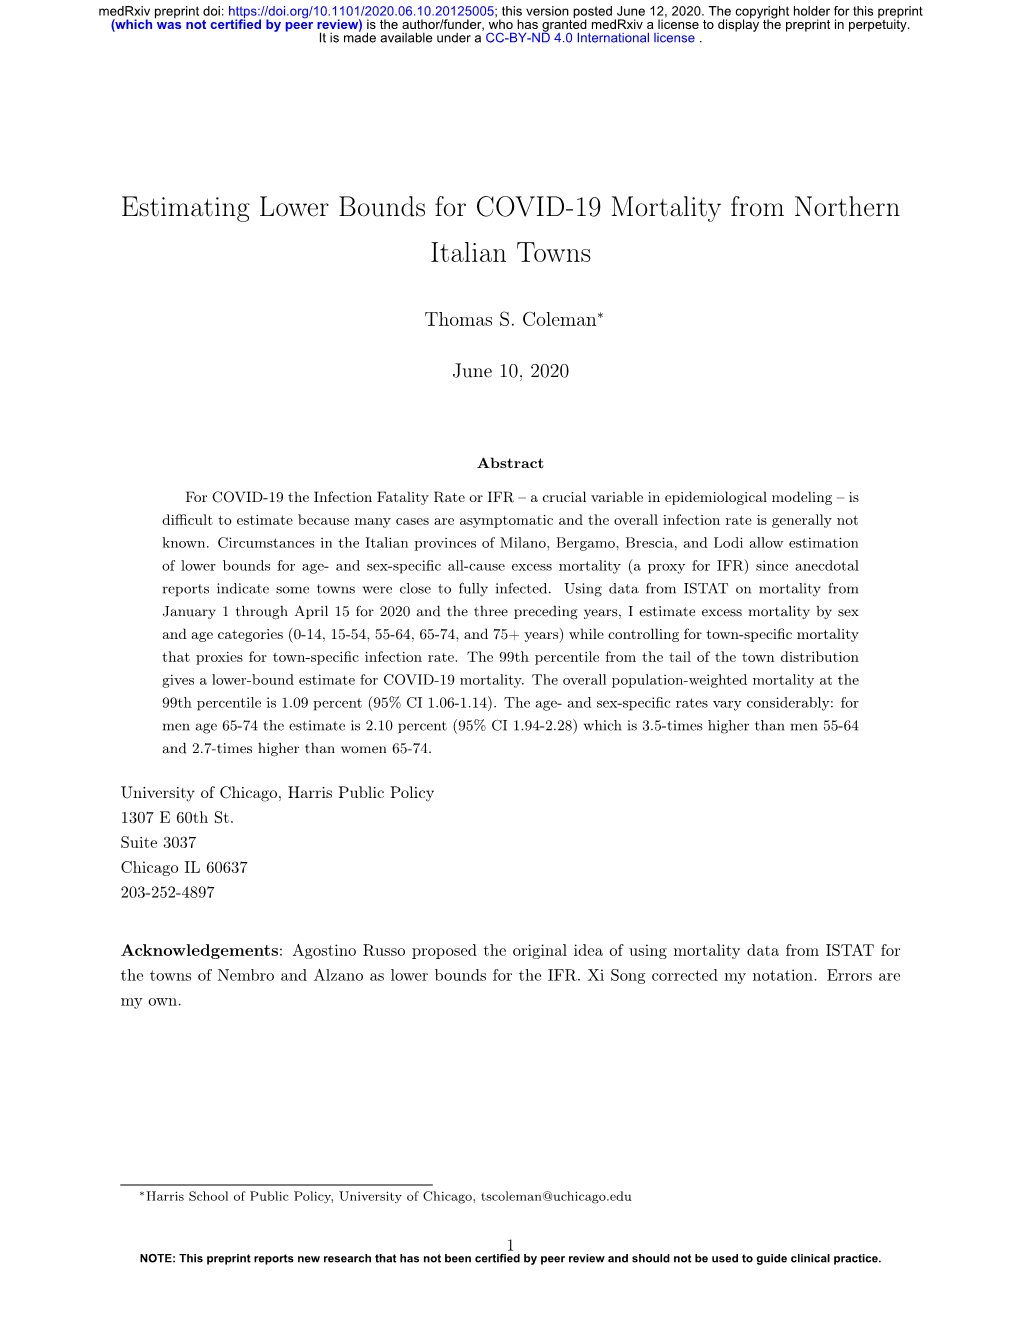 Estimating Lower Bounds for COVID-19 Mortality from Northern Italian Towns